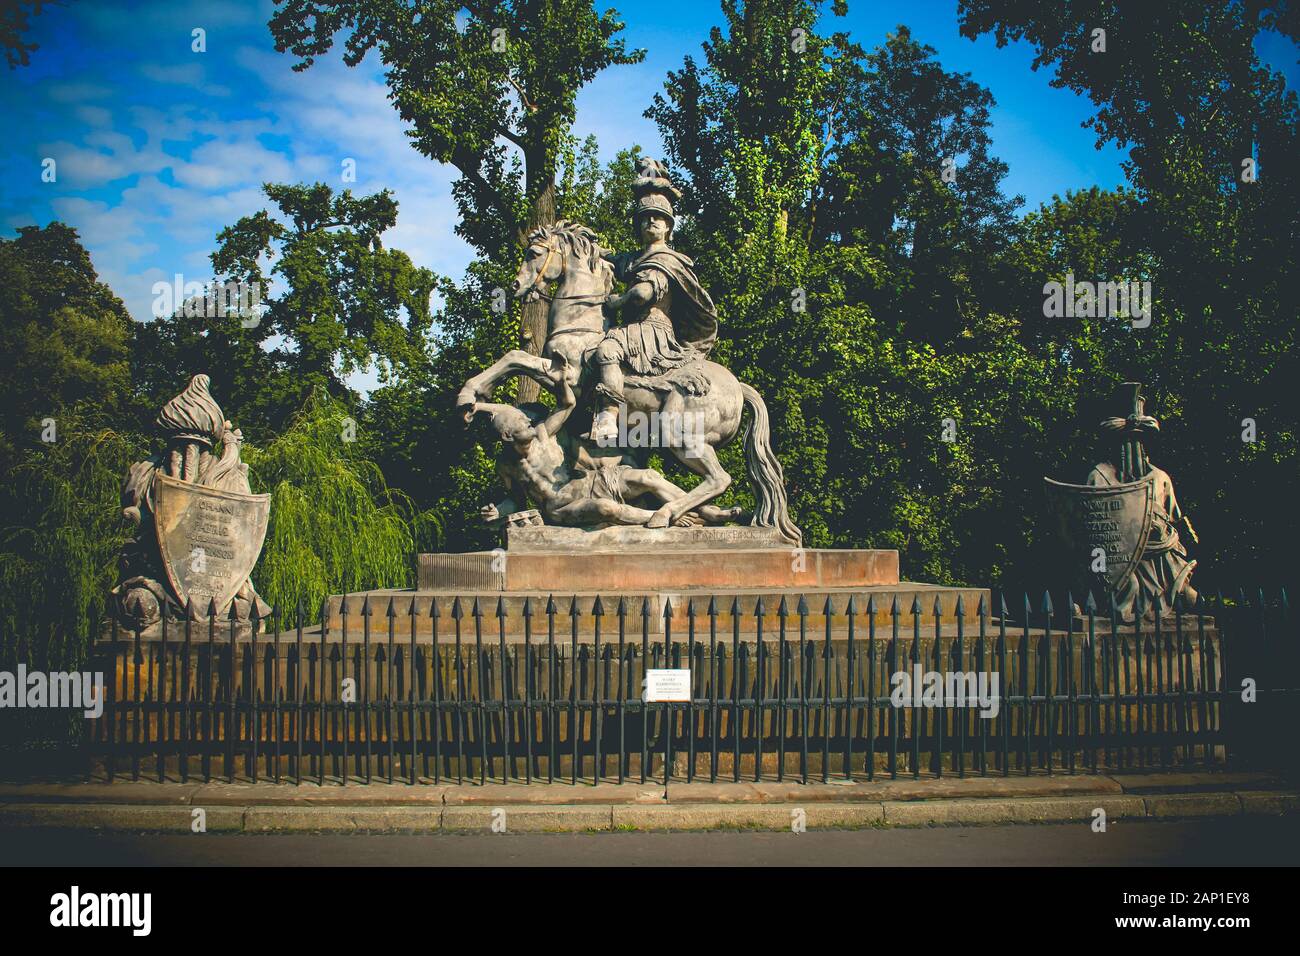 King Jan III Sobieski  monument in Warsaw, Poland, with trees in background Stock Photo